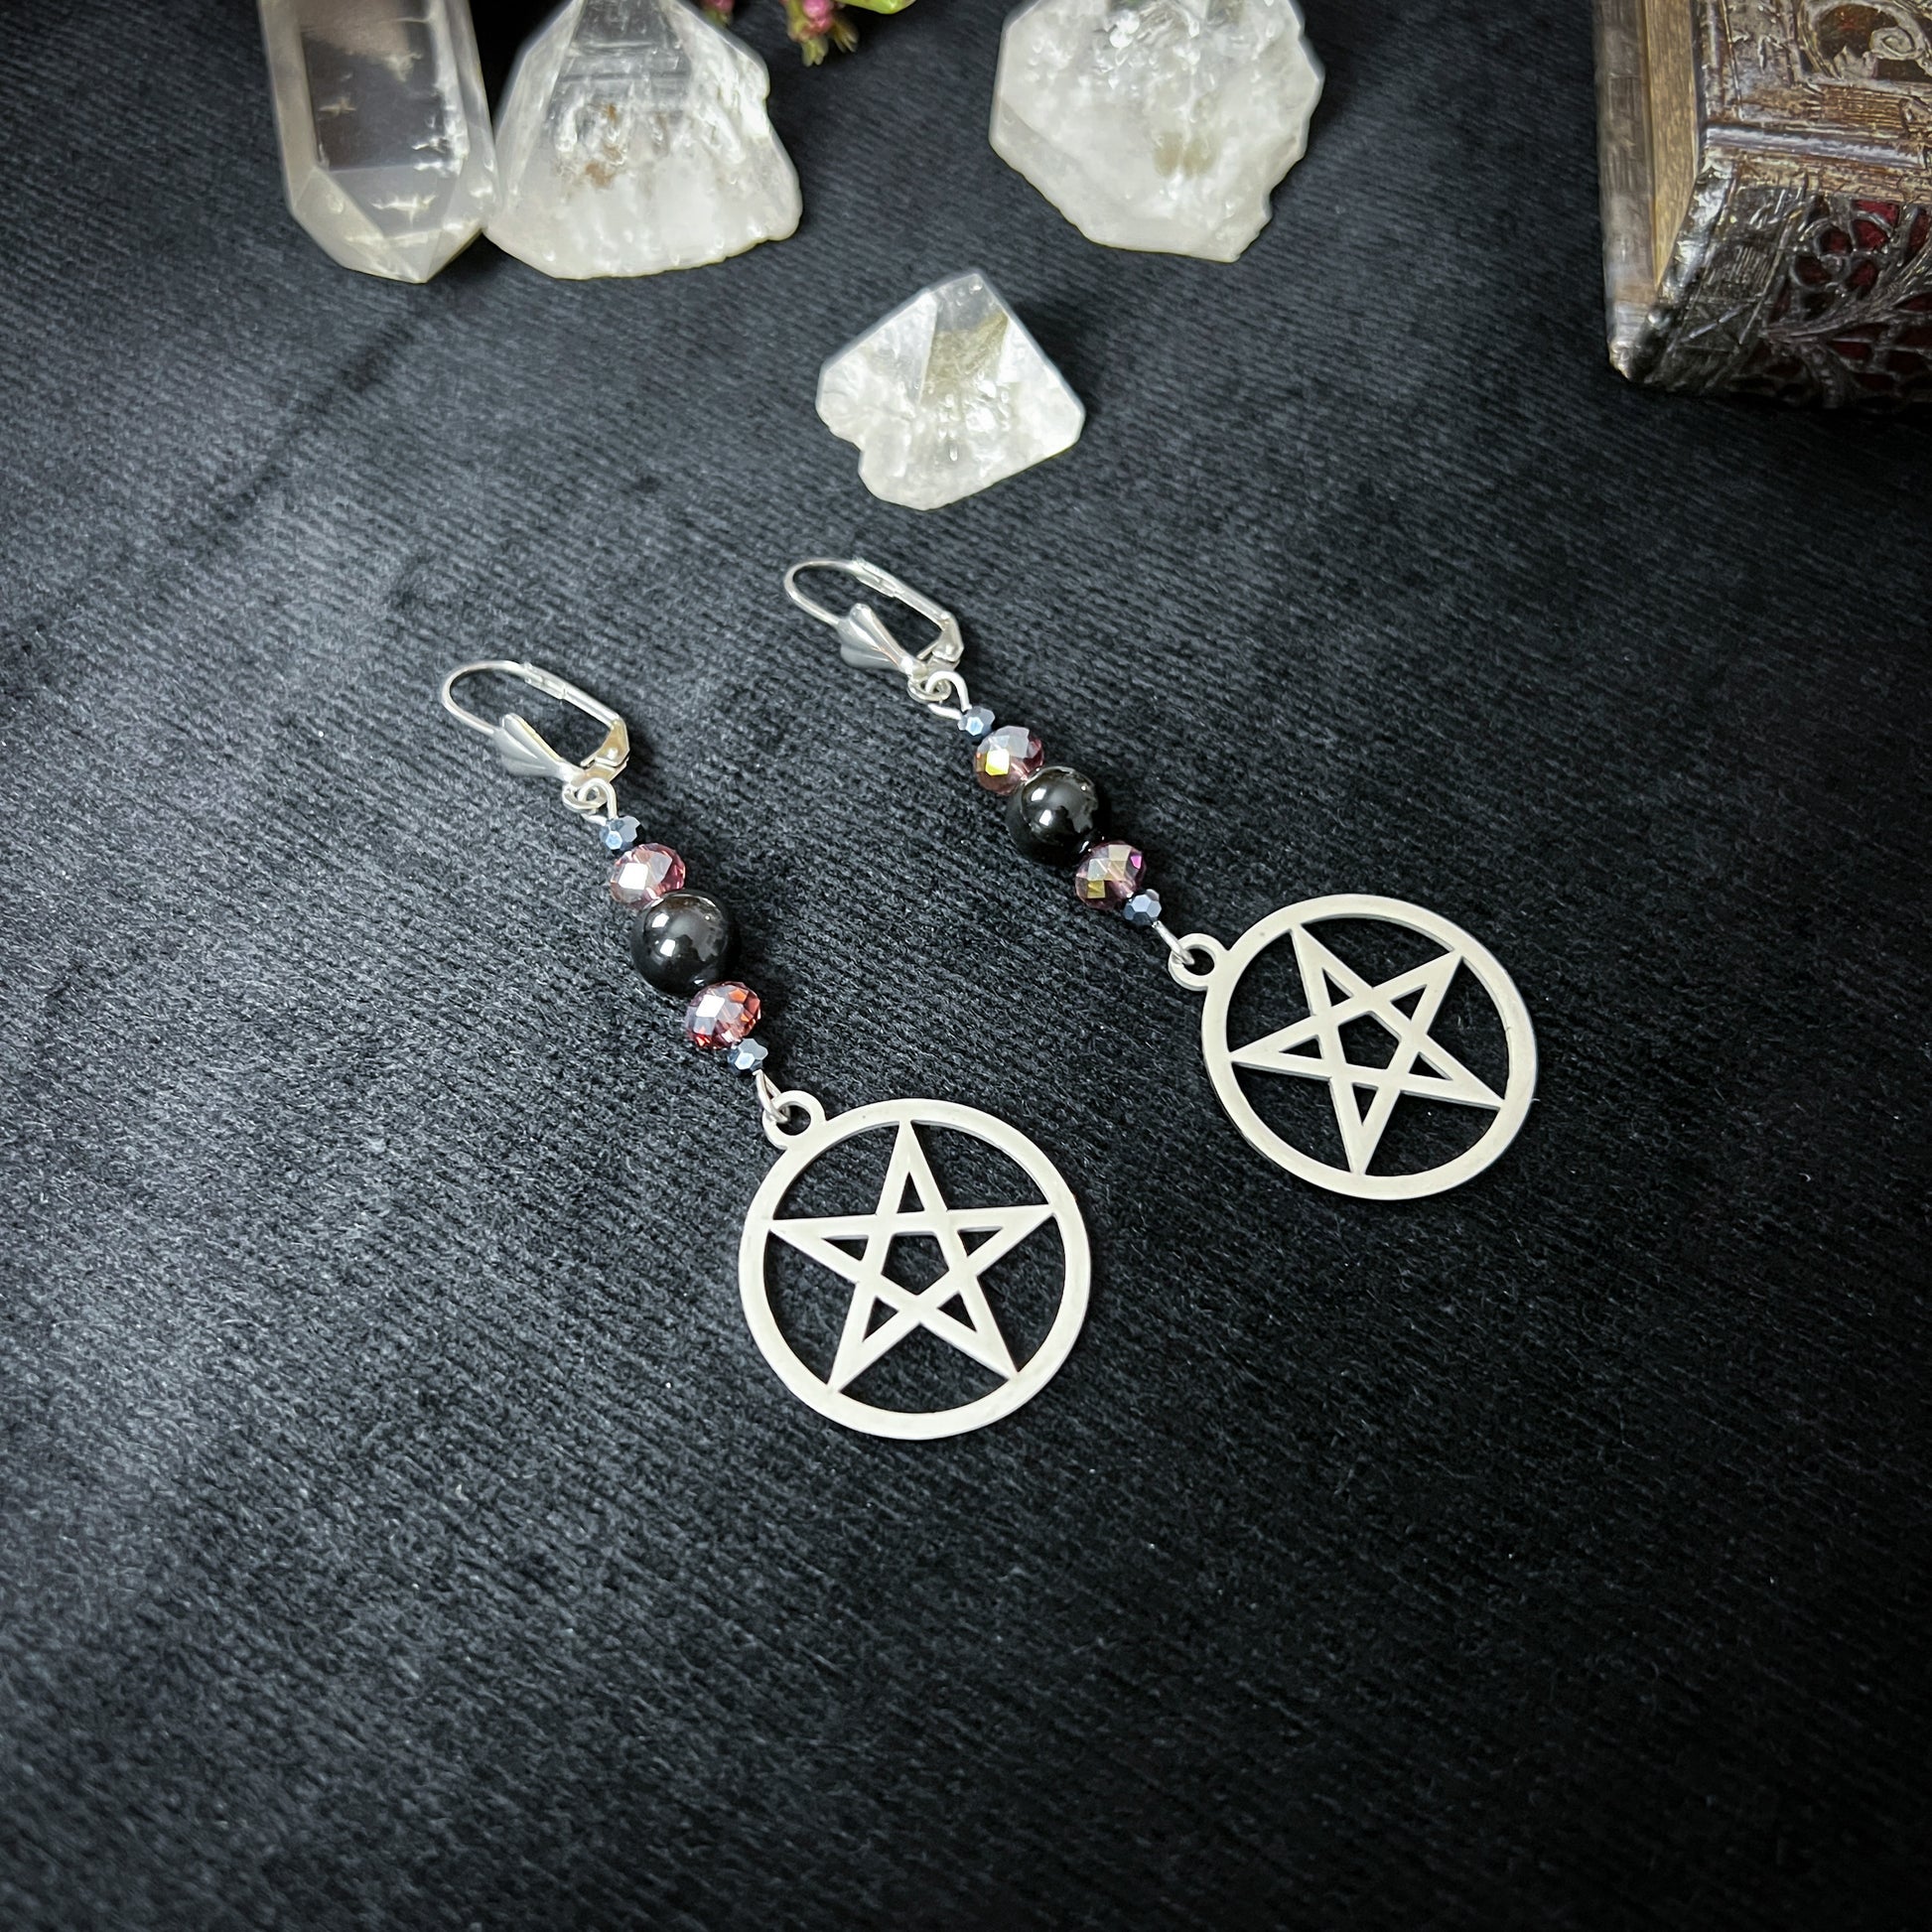 Inverted pentacle earrings made with stainless steel, obsidian and austrian crystal The French Witch shop